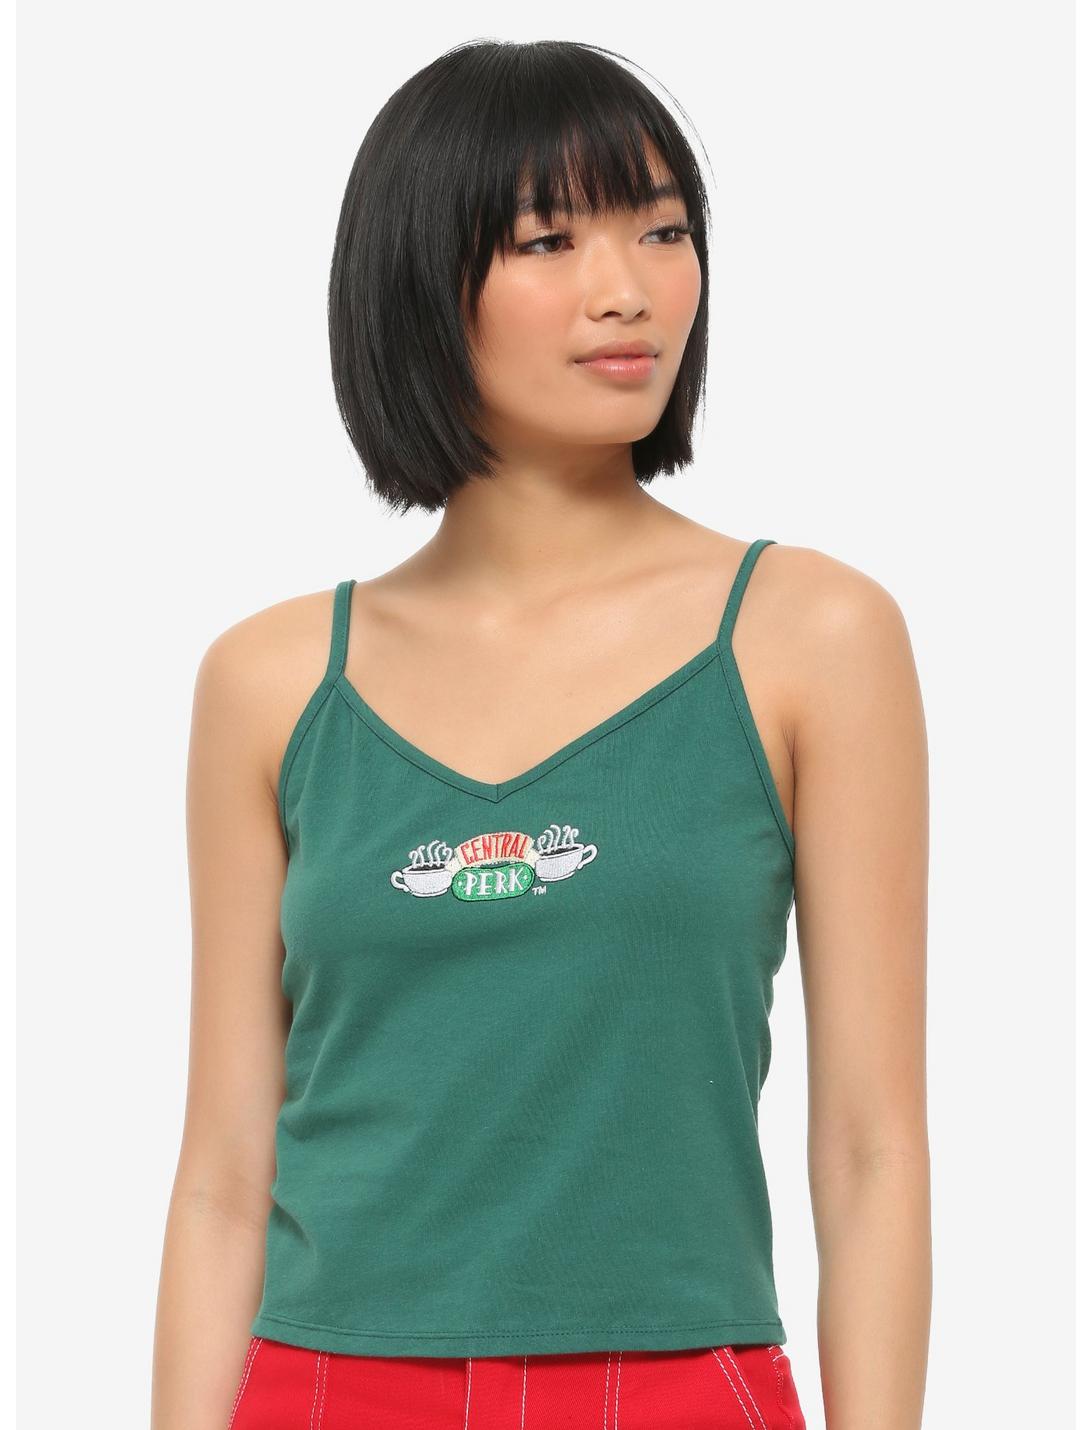 Friends Central Perk Embroidered Logo Girls Tank Top, MULTI, hi-res